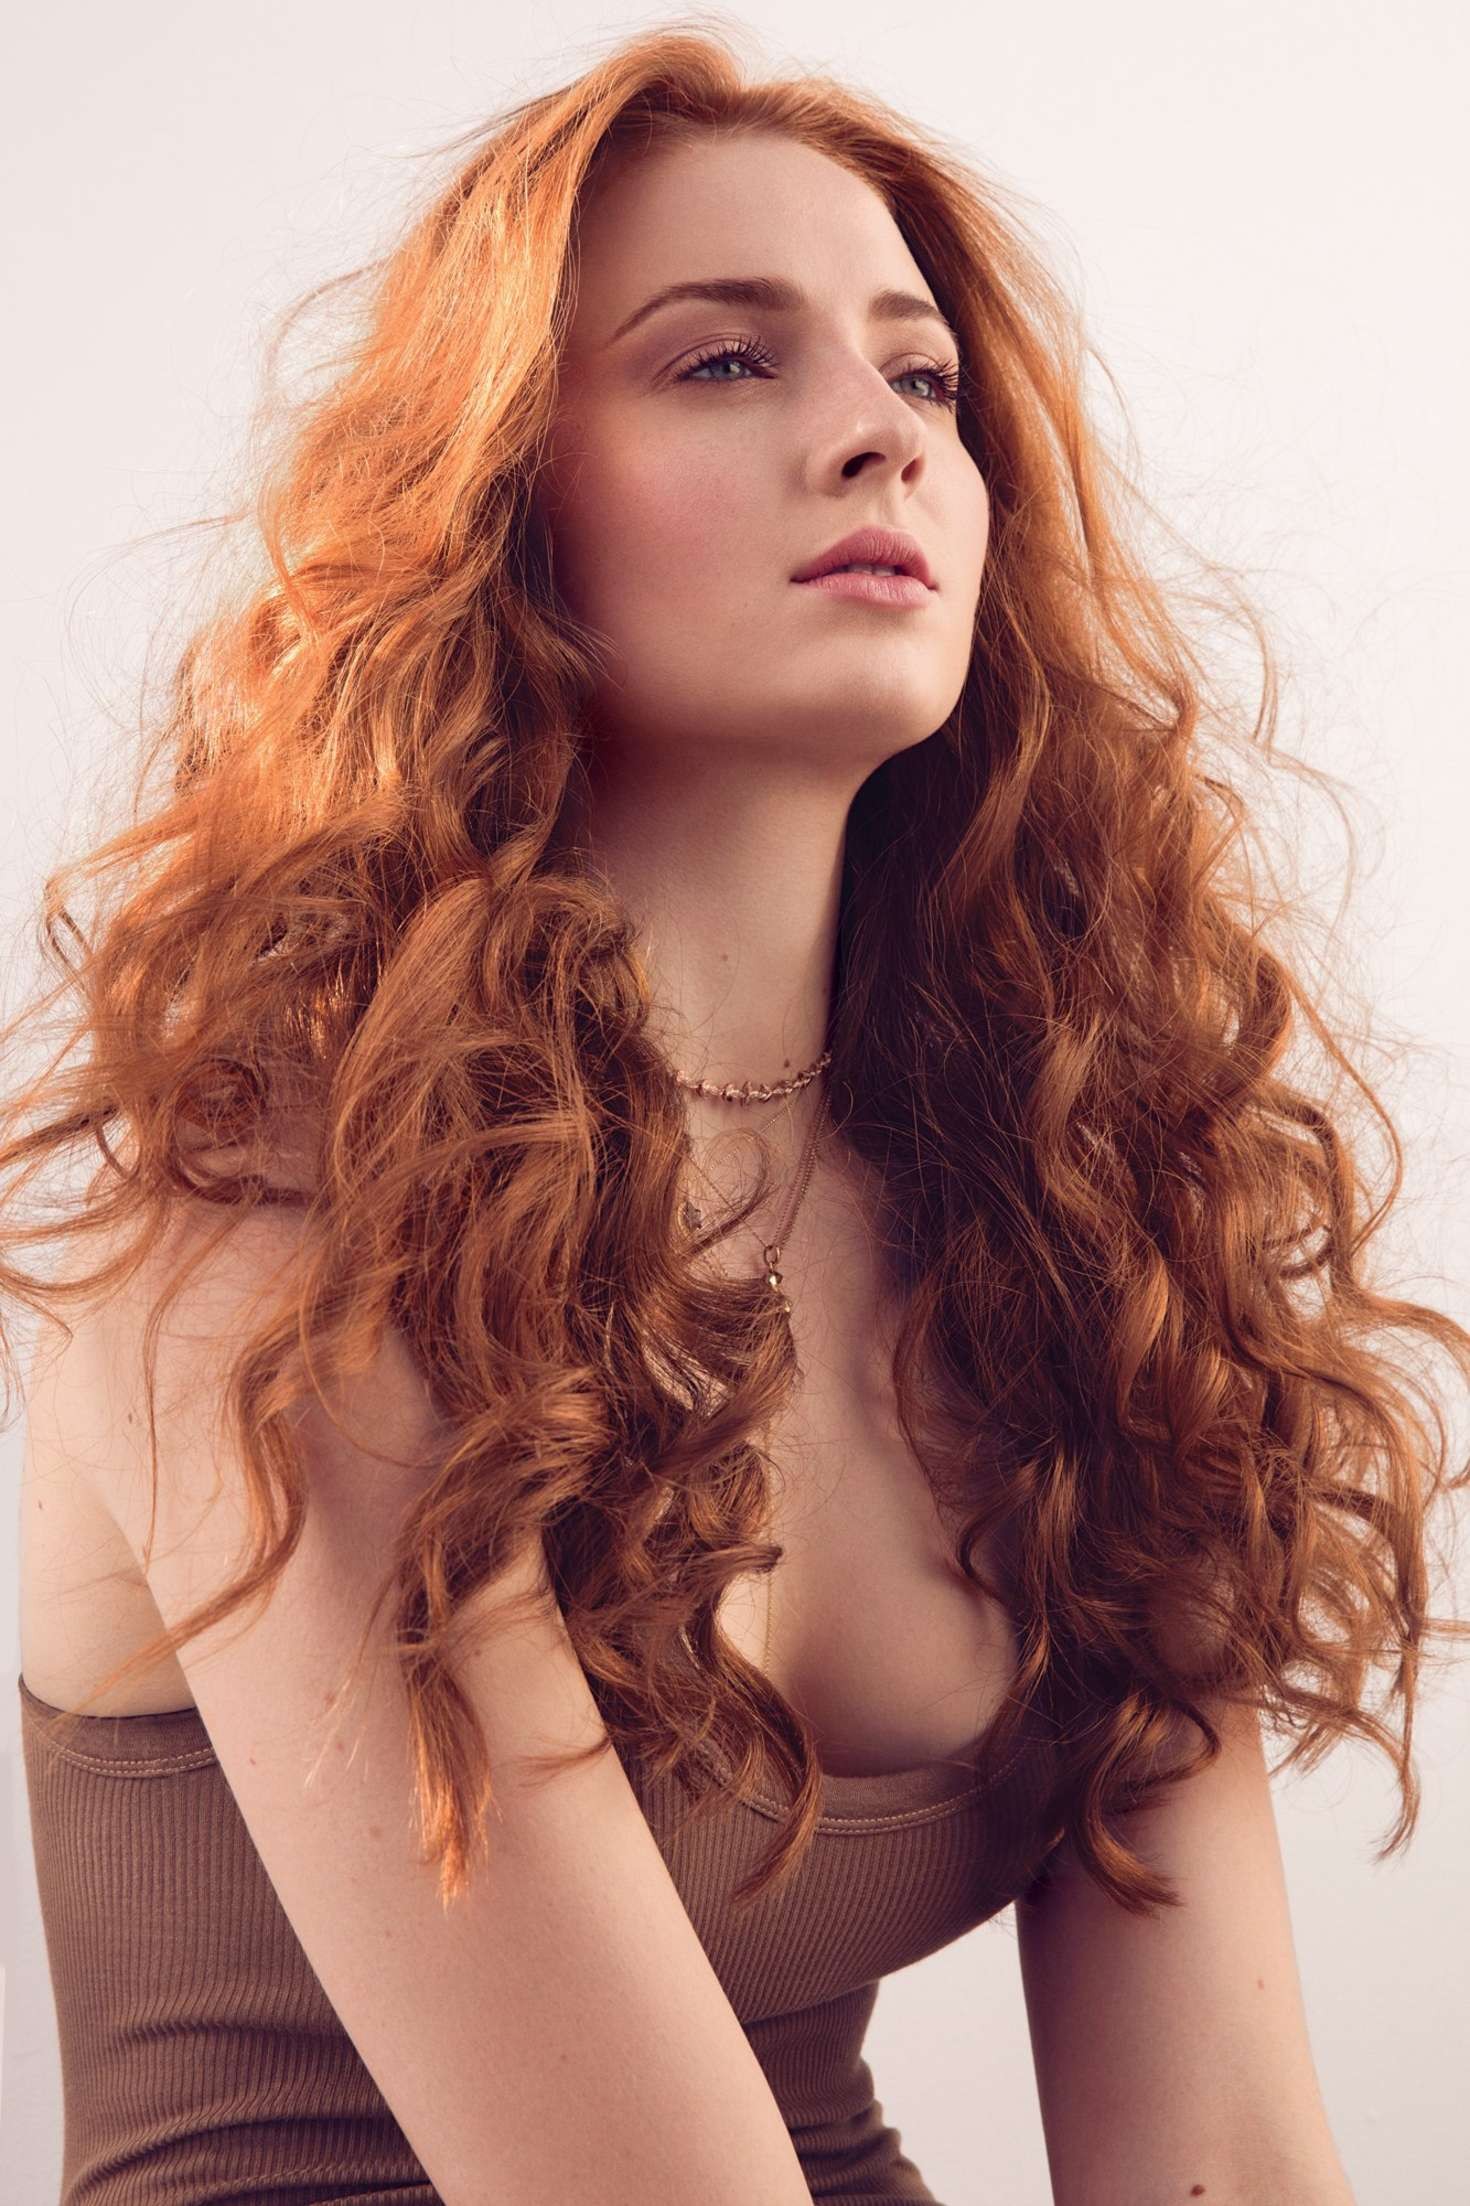 Women Actress Sophie Turner Redhead Long Hair Curly Hair Brown Tops Looking Into The Distance 1470x2206